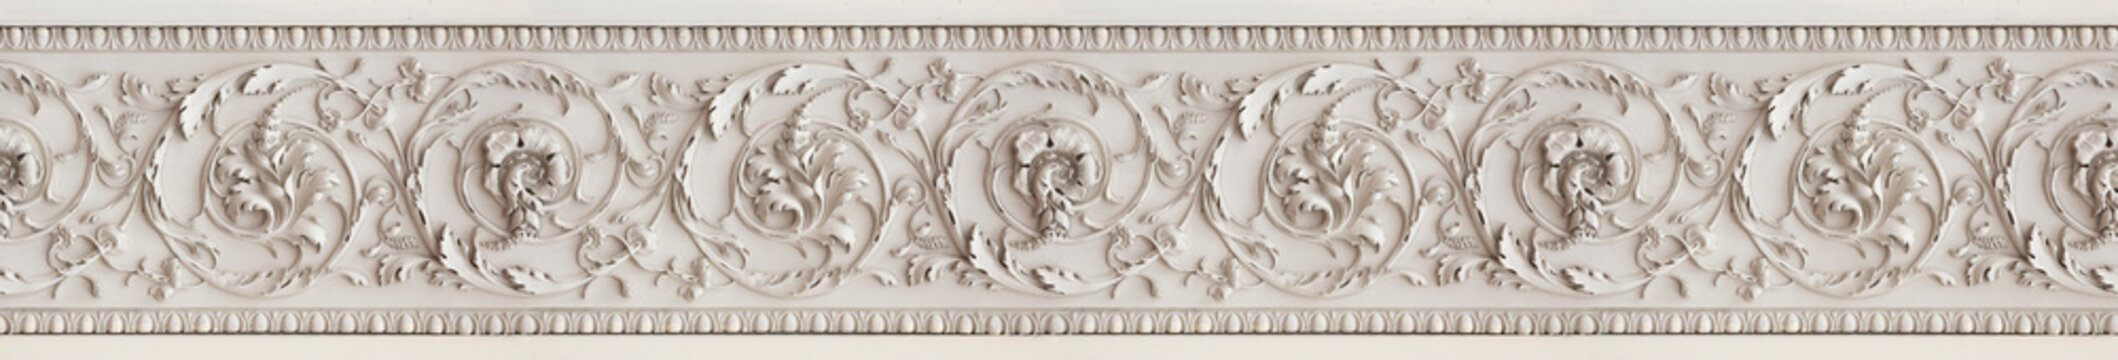 Neoclassical stucco frame with floral elements - seamless pattern useful for renderings applications